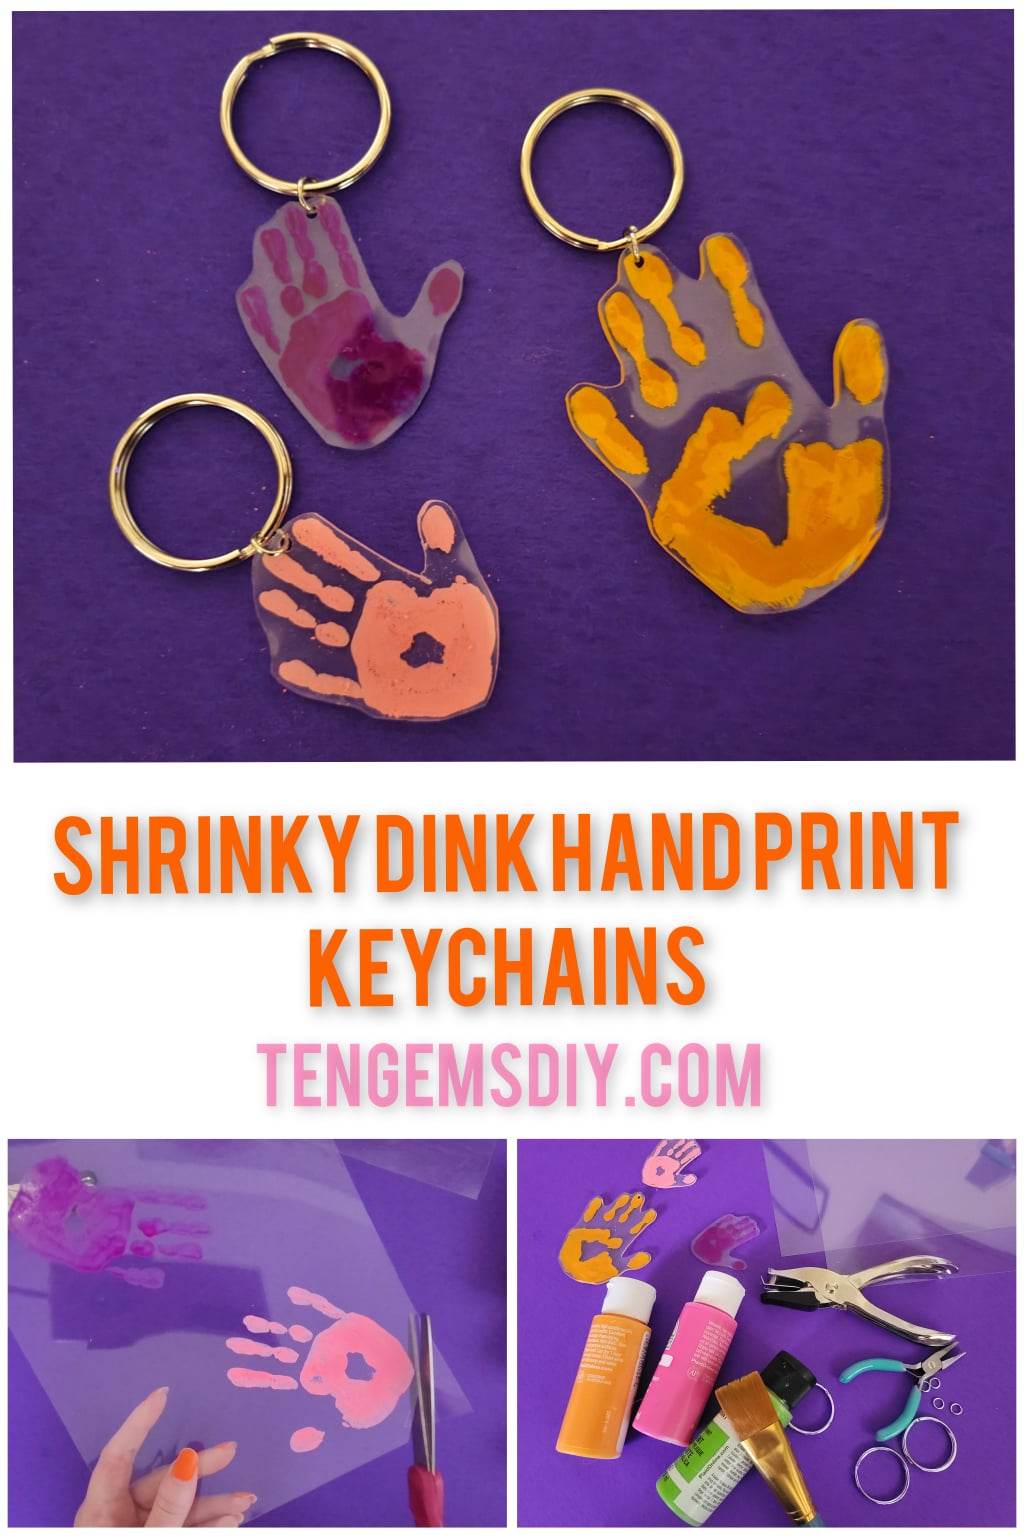 Print your own SHRINKY DINK PHOTOS! DIY Photo keychains and more. 